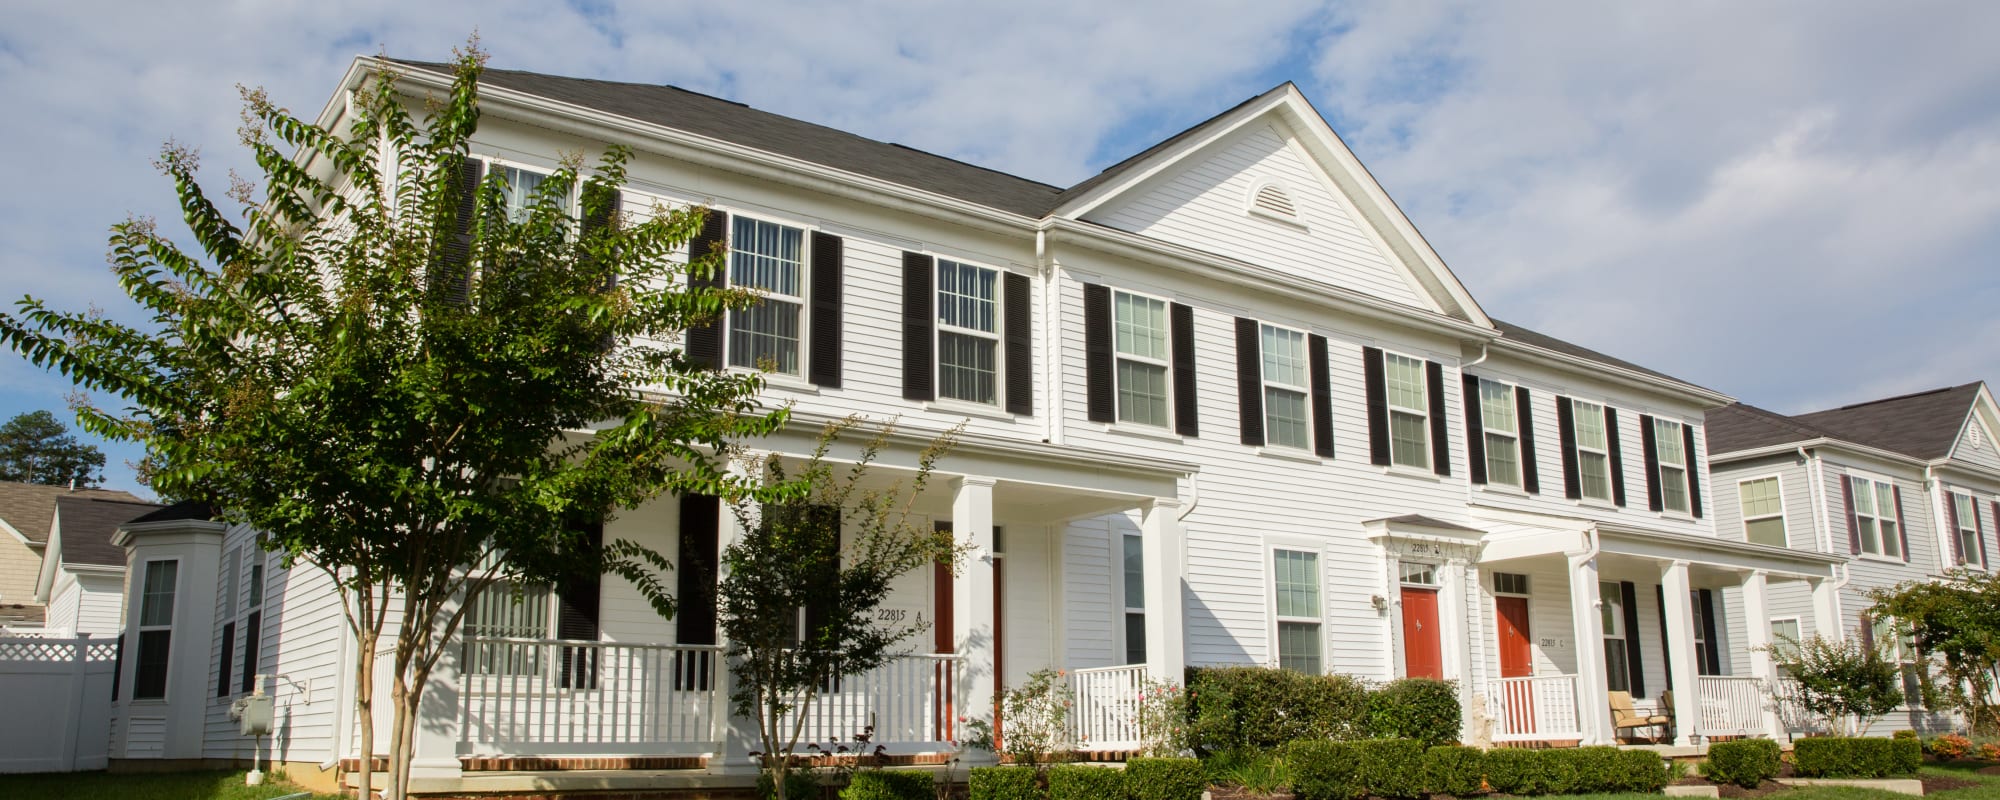 Exterior view of homes at Challenger Estates in Patuxent River, Maryland